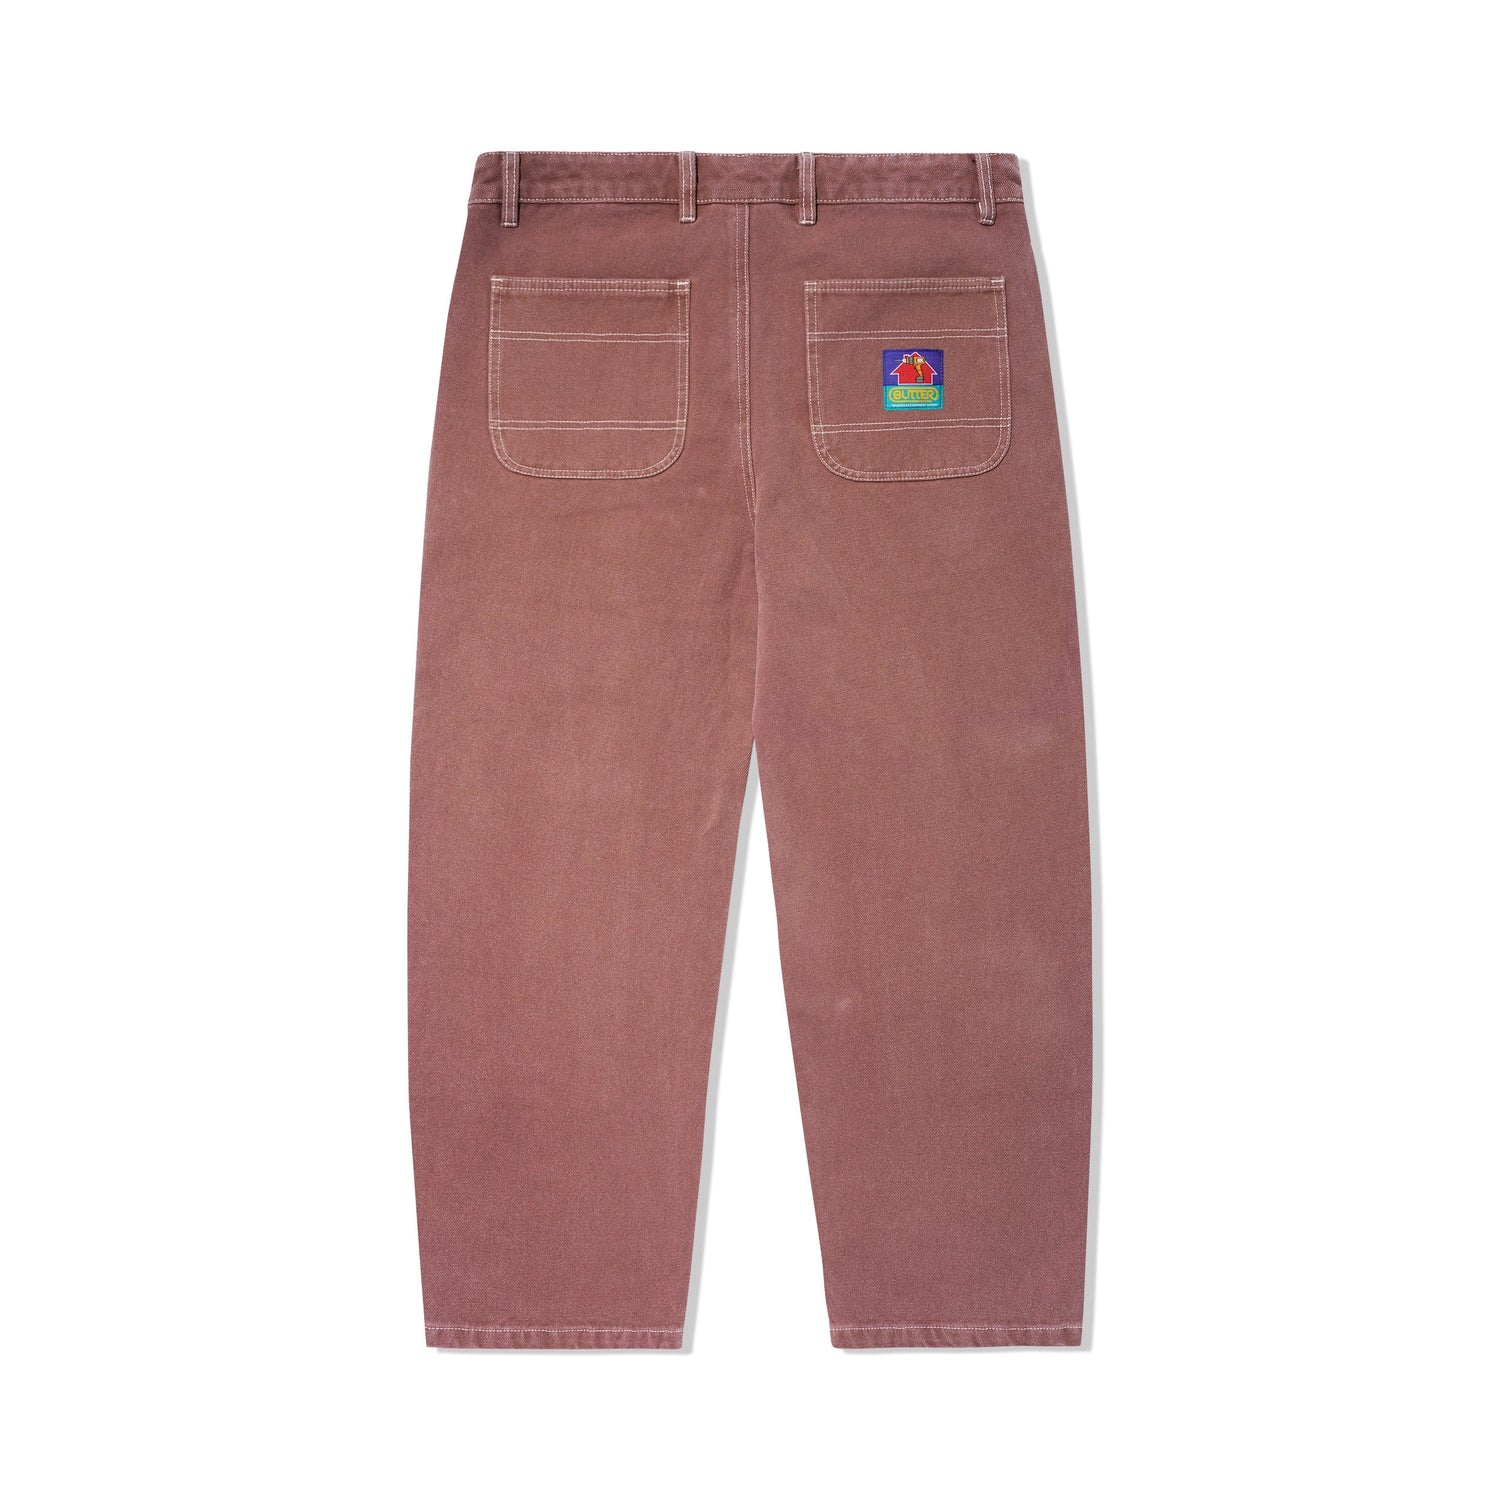 Washed Canvas Double Knee Pants, Brick